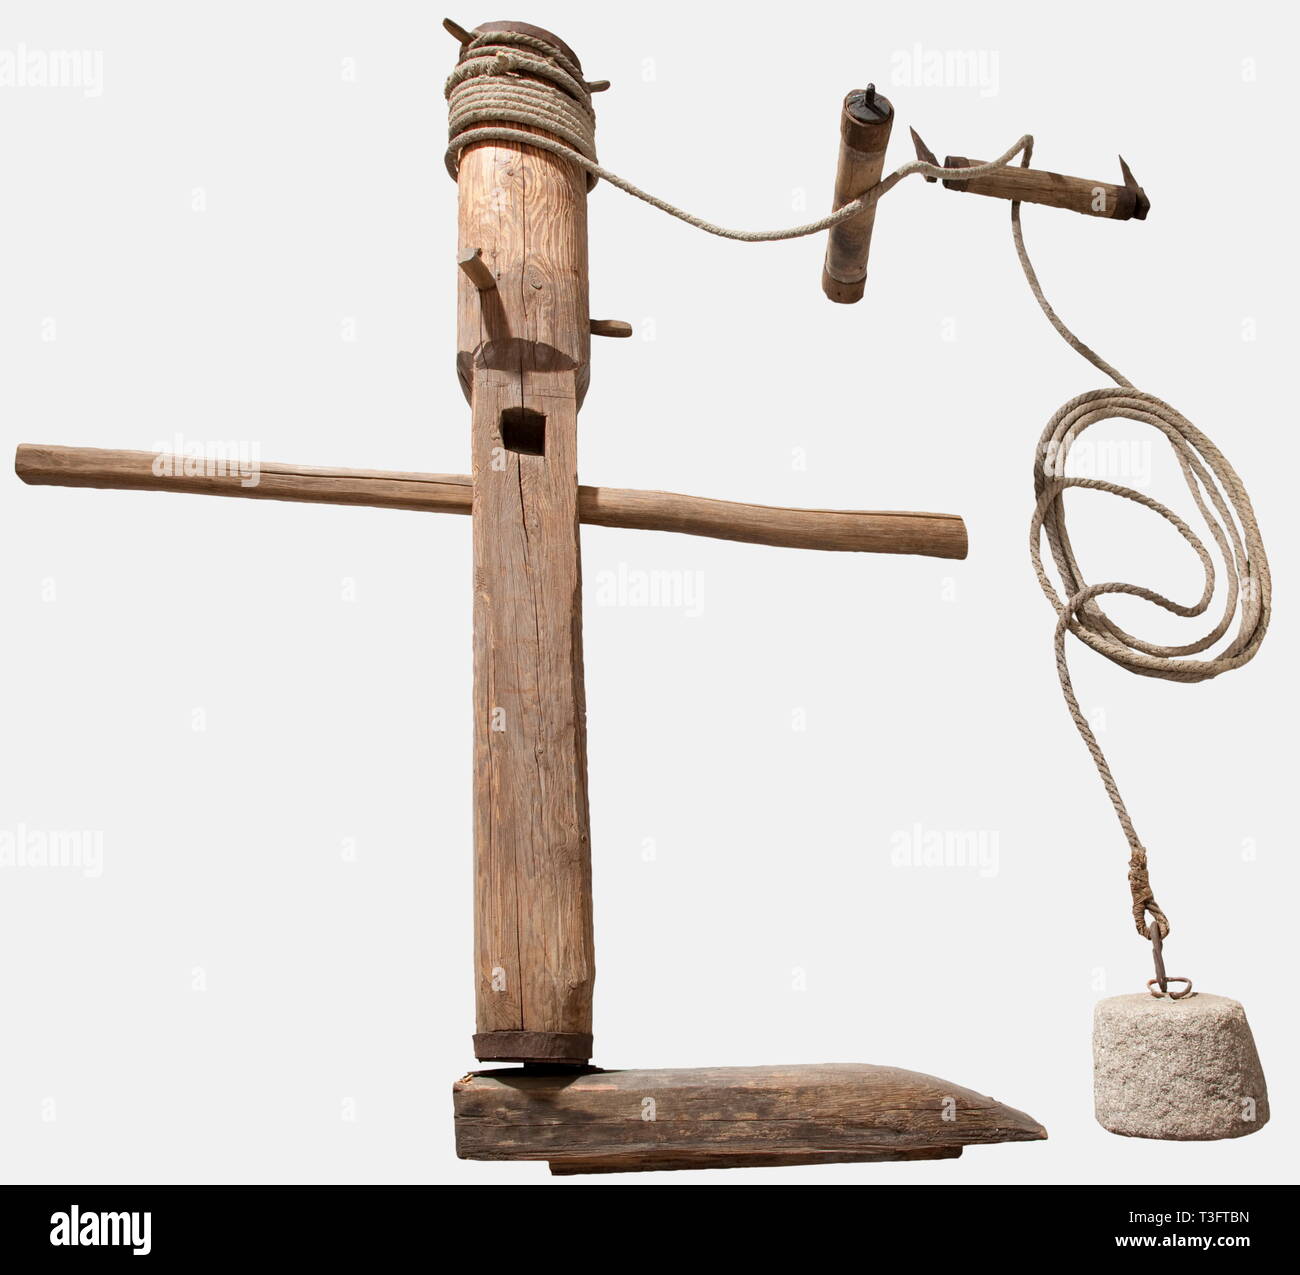 A large windlass for suspension torture, Southern Germany/Austria, 17th/18th century Softwood with iron bands. Vertical windlass with two pulleys. Horizontal base made of a rectangular beam with an inset iron pedestal. Vertical windlass, the lower half quadratic with large rectangular openings for the turning bars. The upper half is round set with crank pins for the heavy hemp rope. Two pulleys with forged iron bearings. Also a slightly conical stone weight of granite with an iron suspension ring. Height 210 cm. The suspension device is one of th, Additional-Rights-Clearance-Info-Not-Available Stock Photo